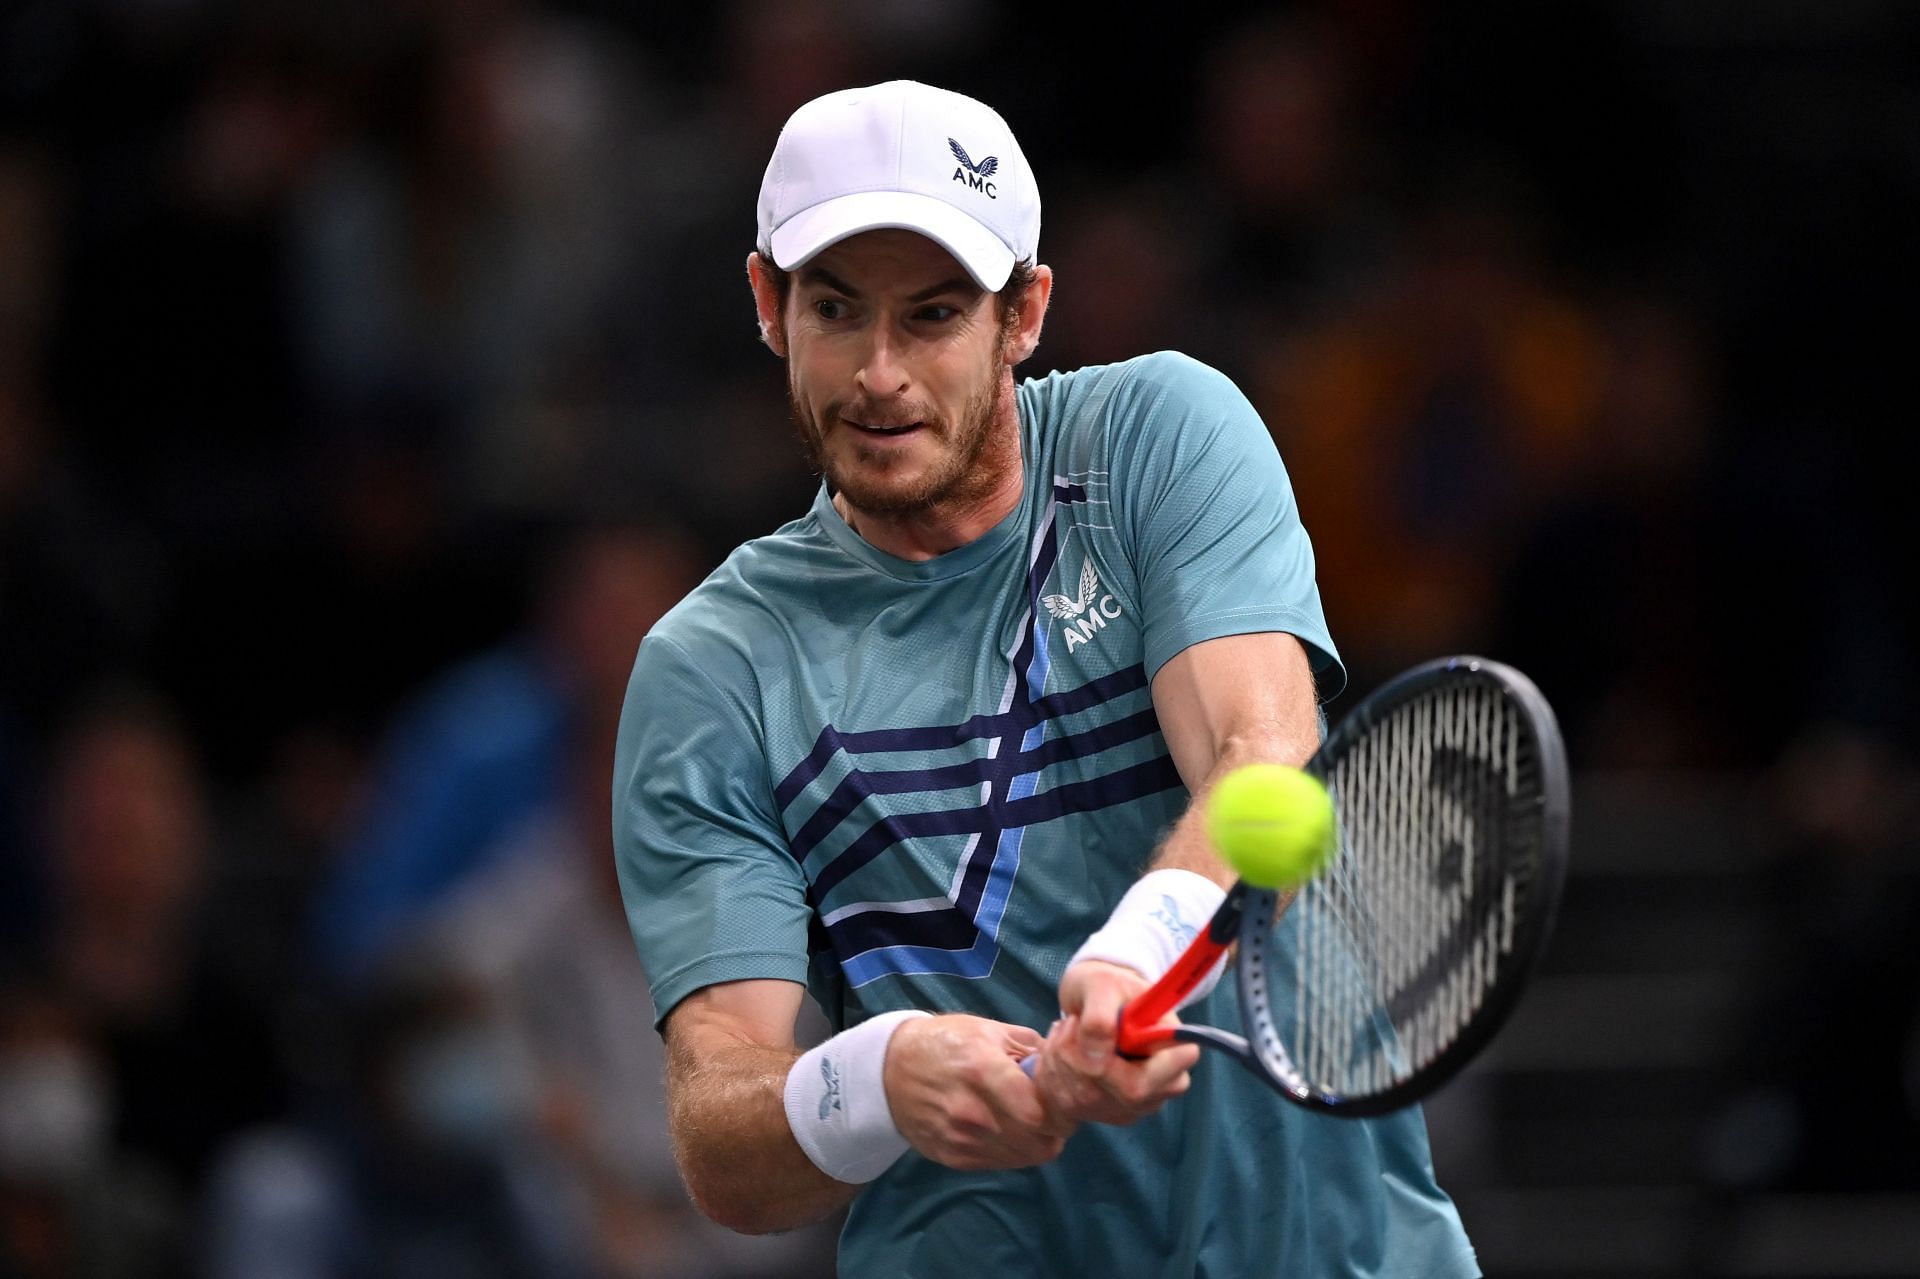 Andy Murray at the Rolex Paris Masters 2021